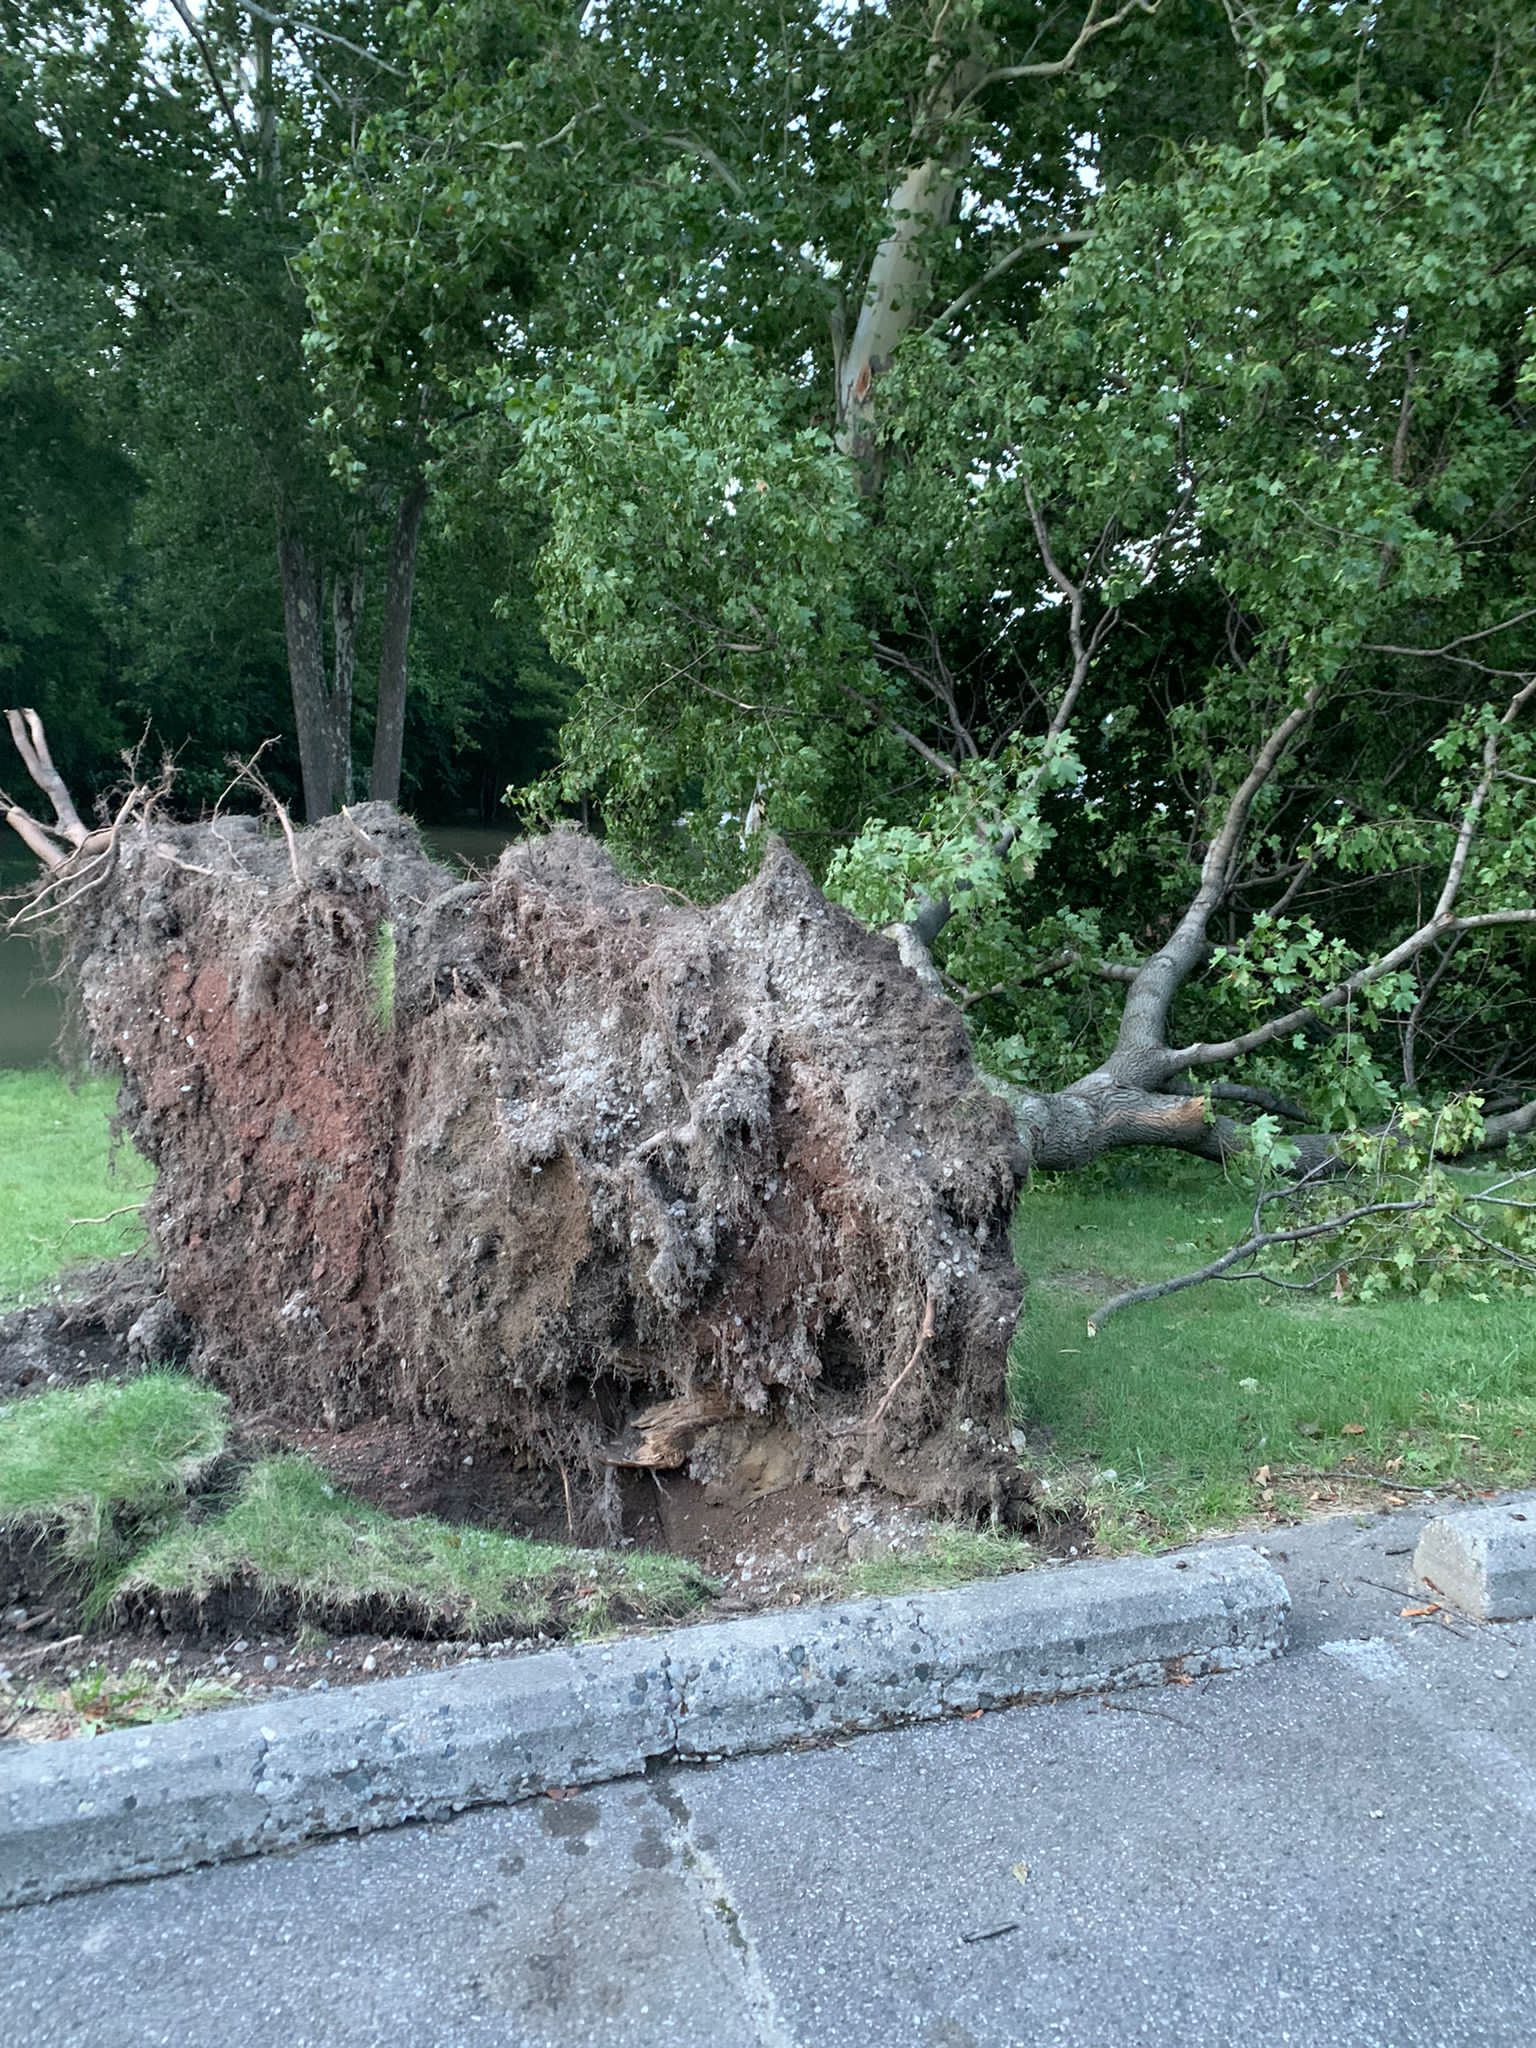 Uprooted tree in detroit